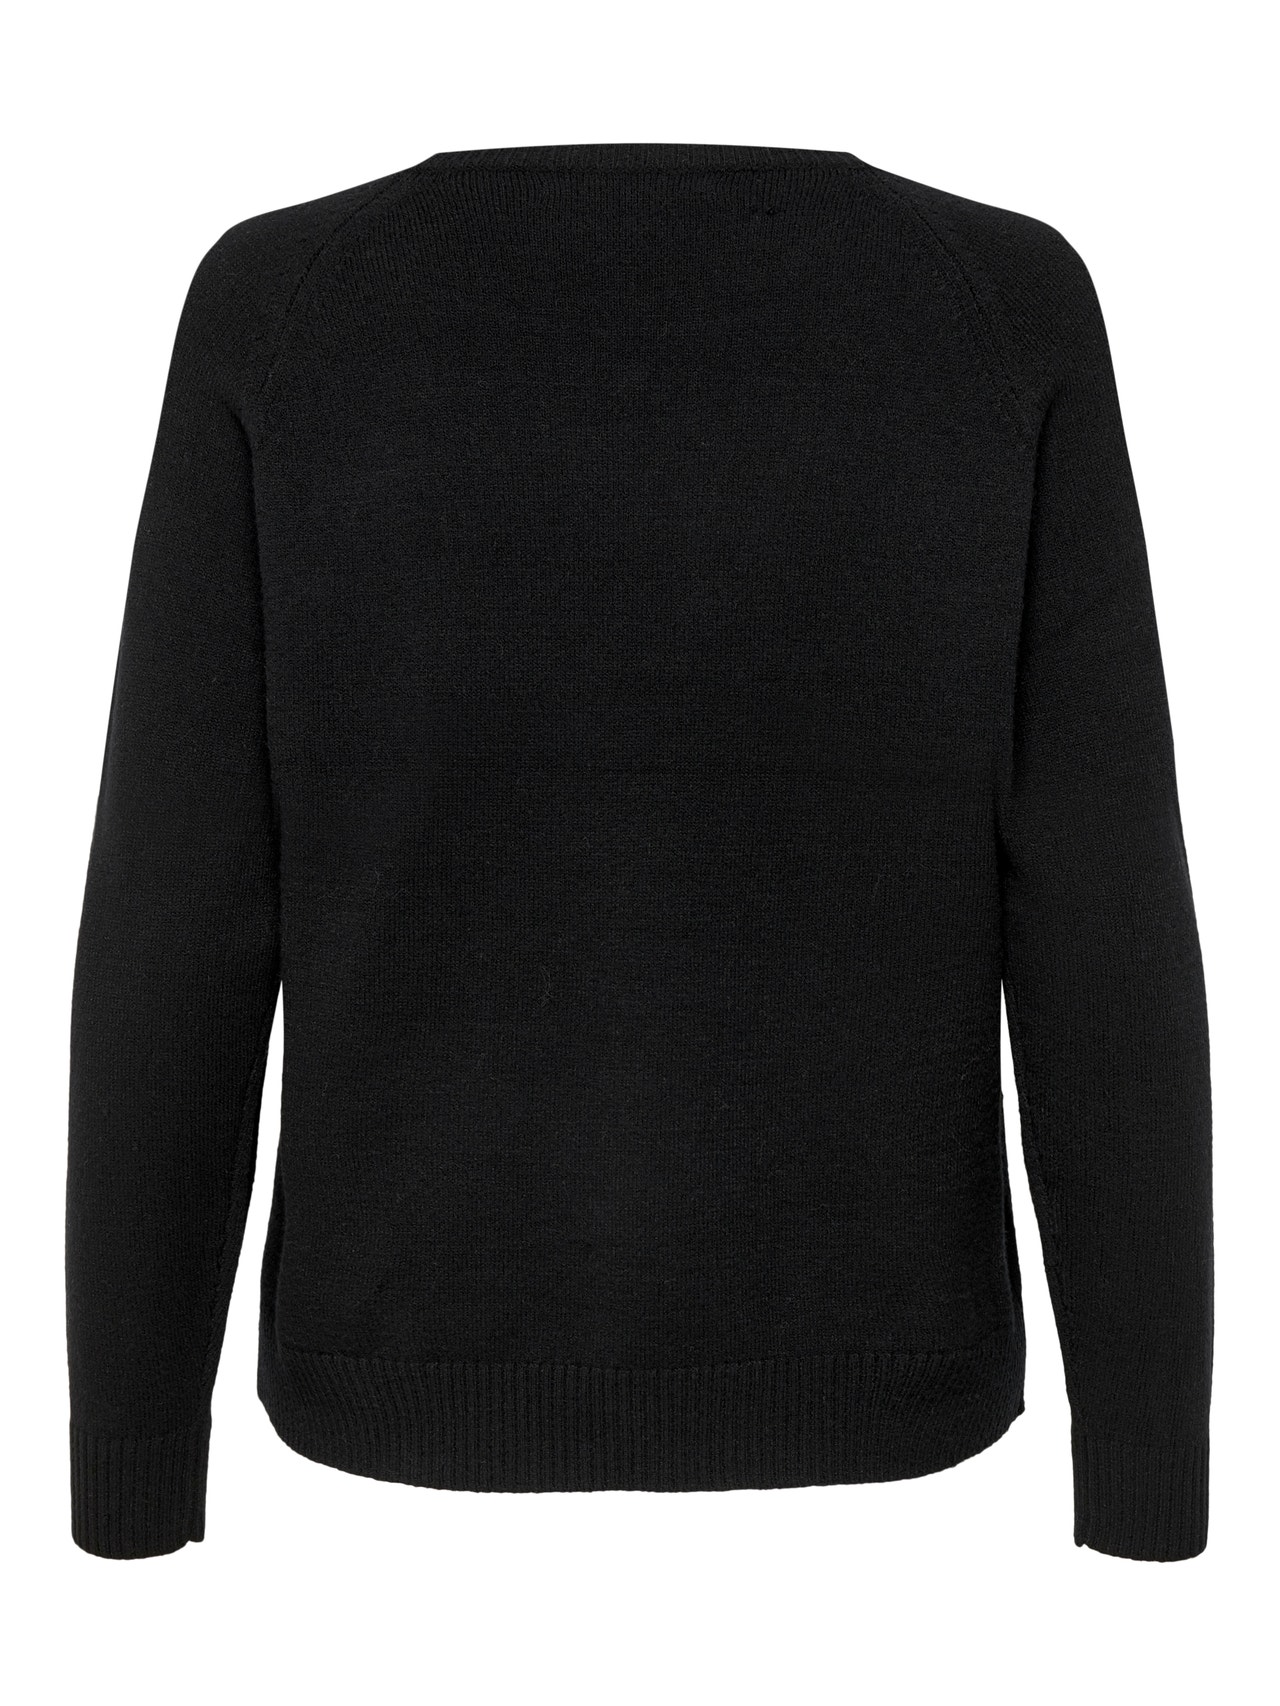 ONLY Couleur unie Pull en maille -Black - 15170427